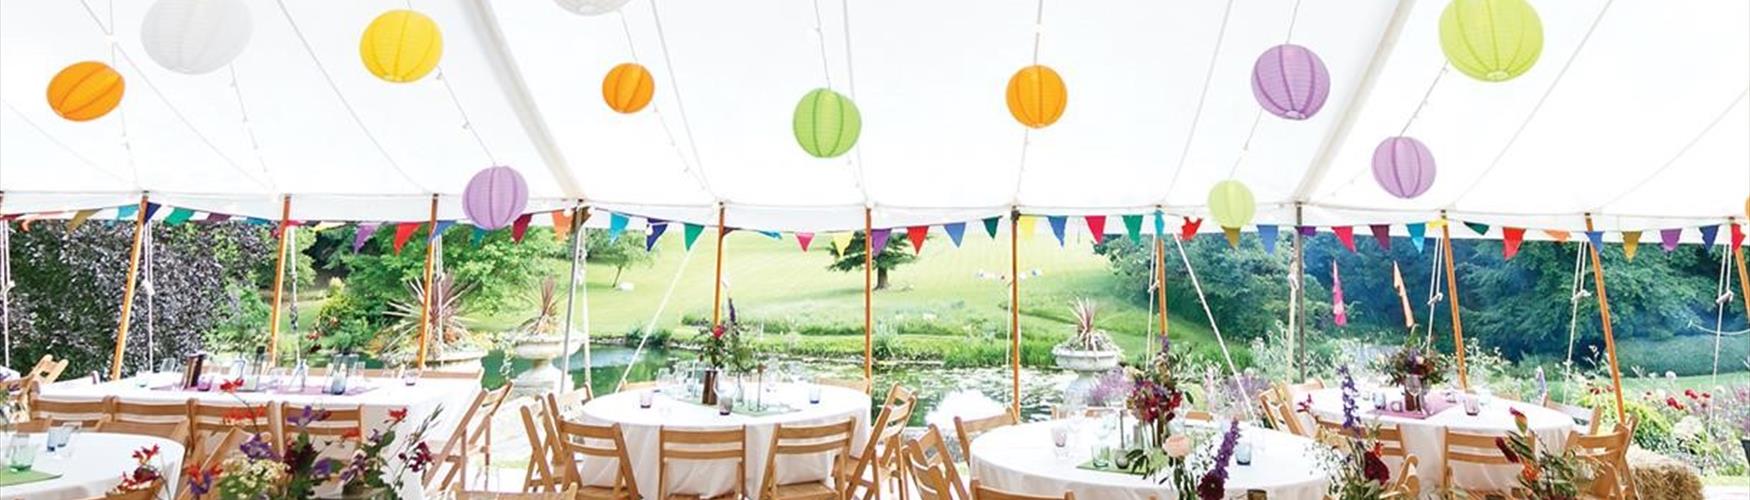 Event marquee with coloured hanging lanterns at Cowley Manor